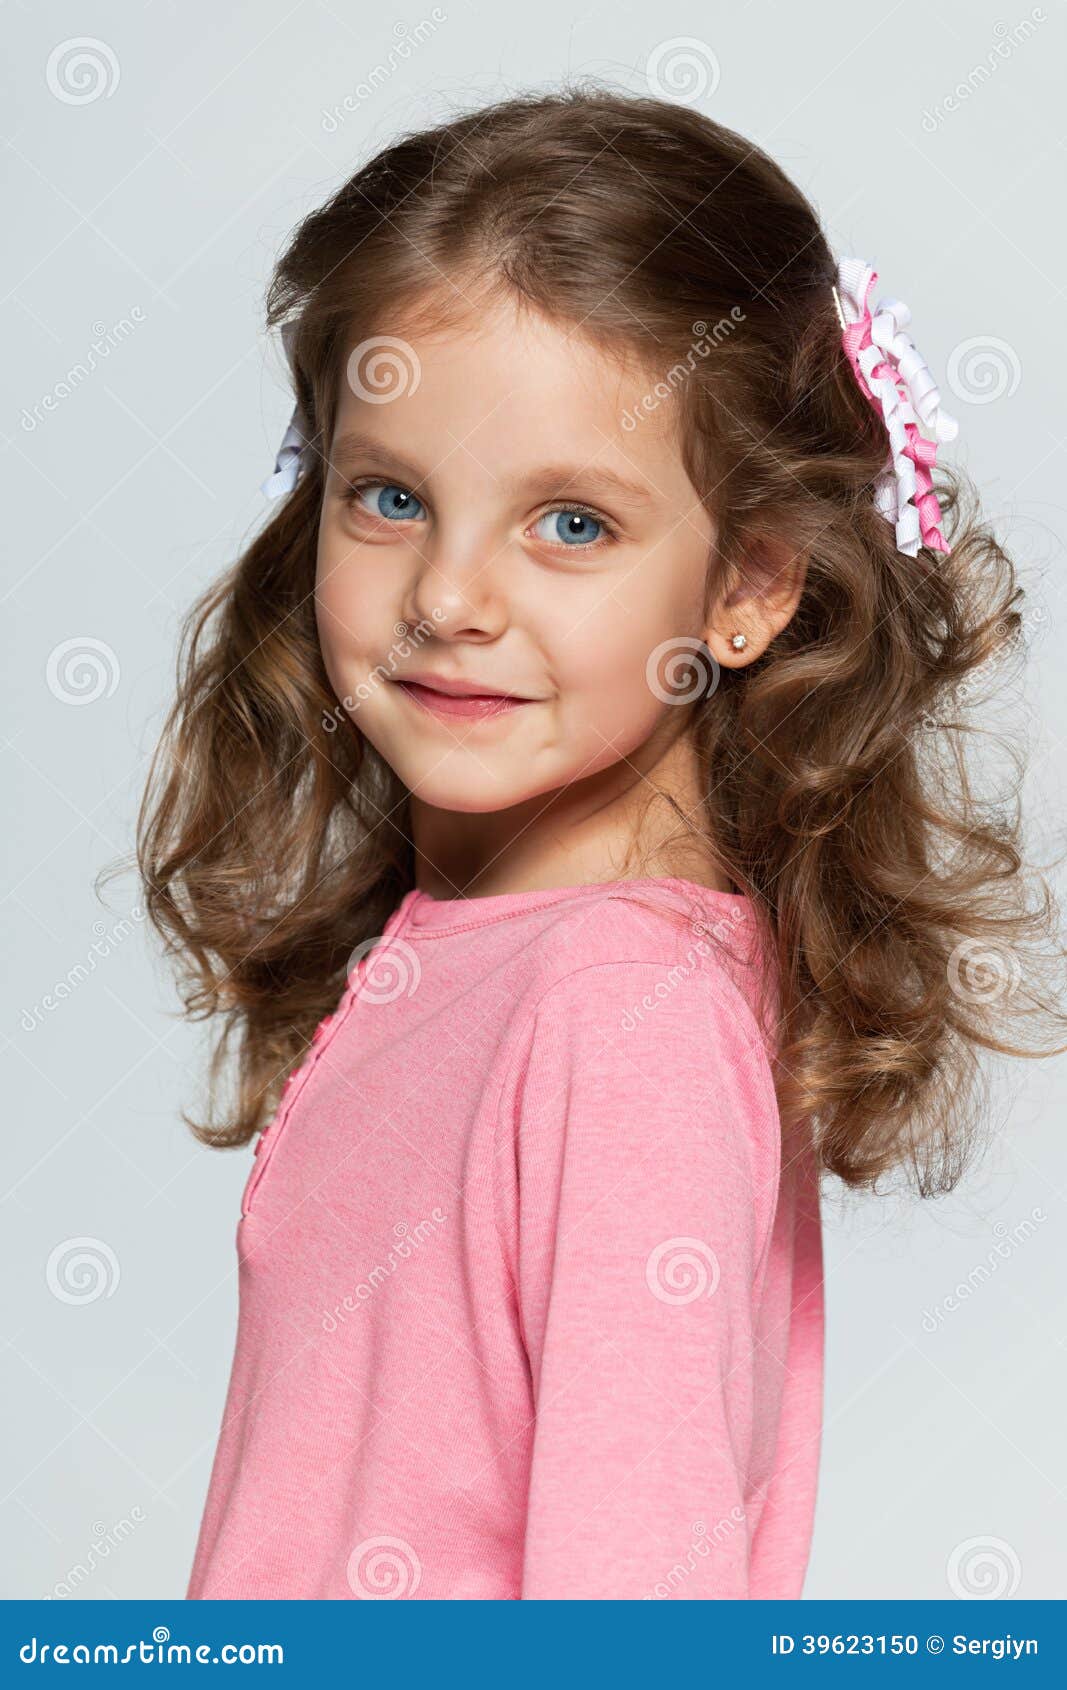 Smiling Little Girl Against the Gray Background Stock Photo - Image of ...